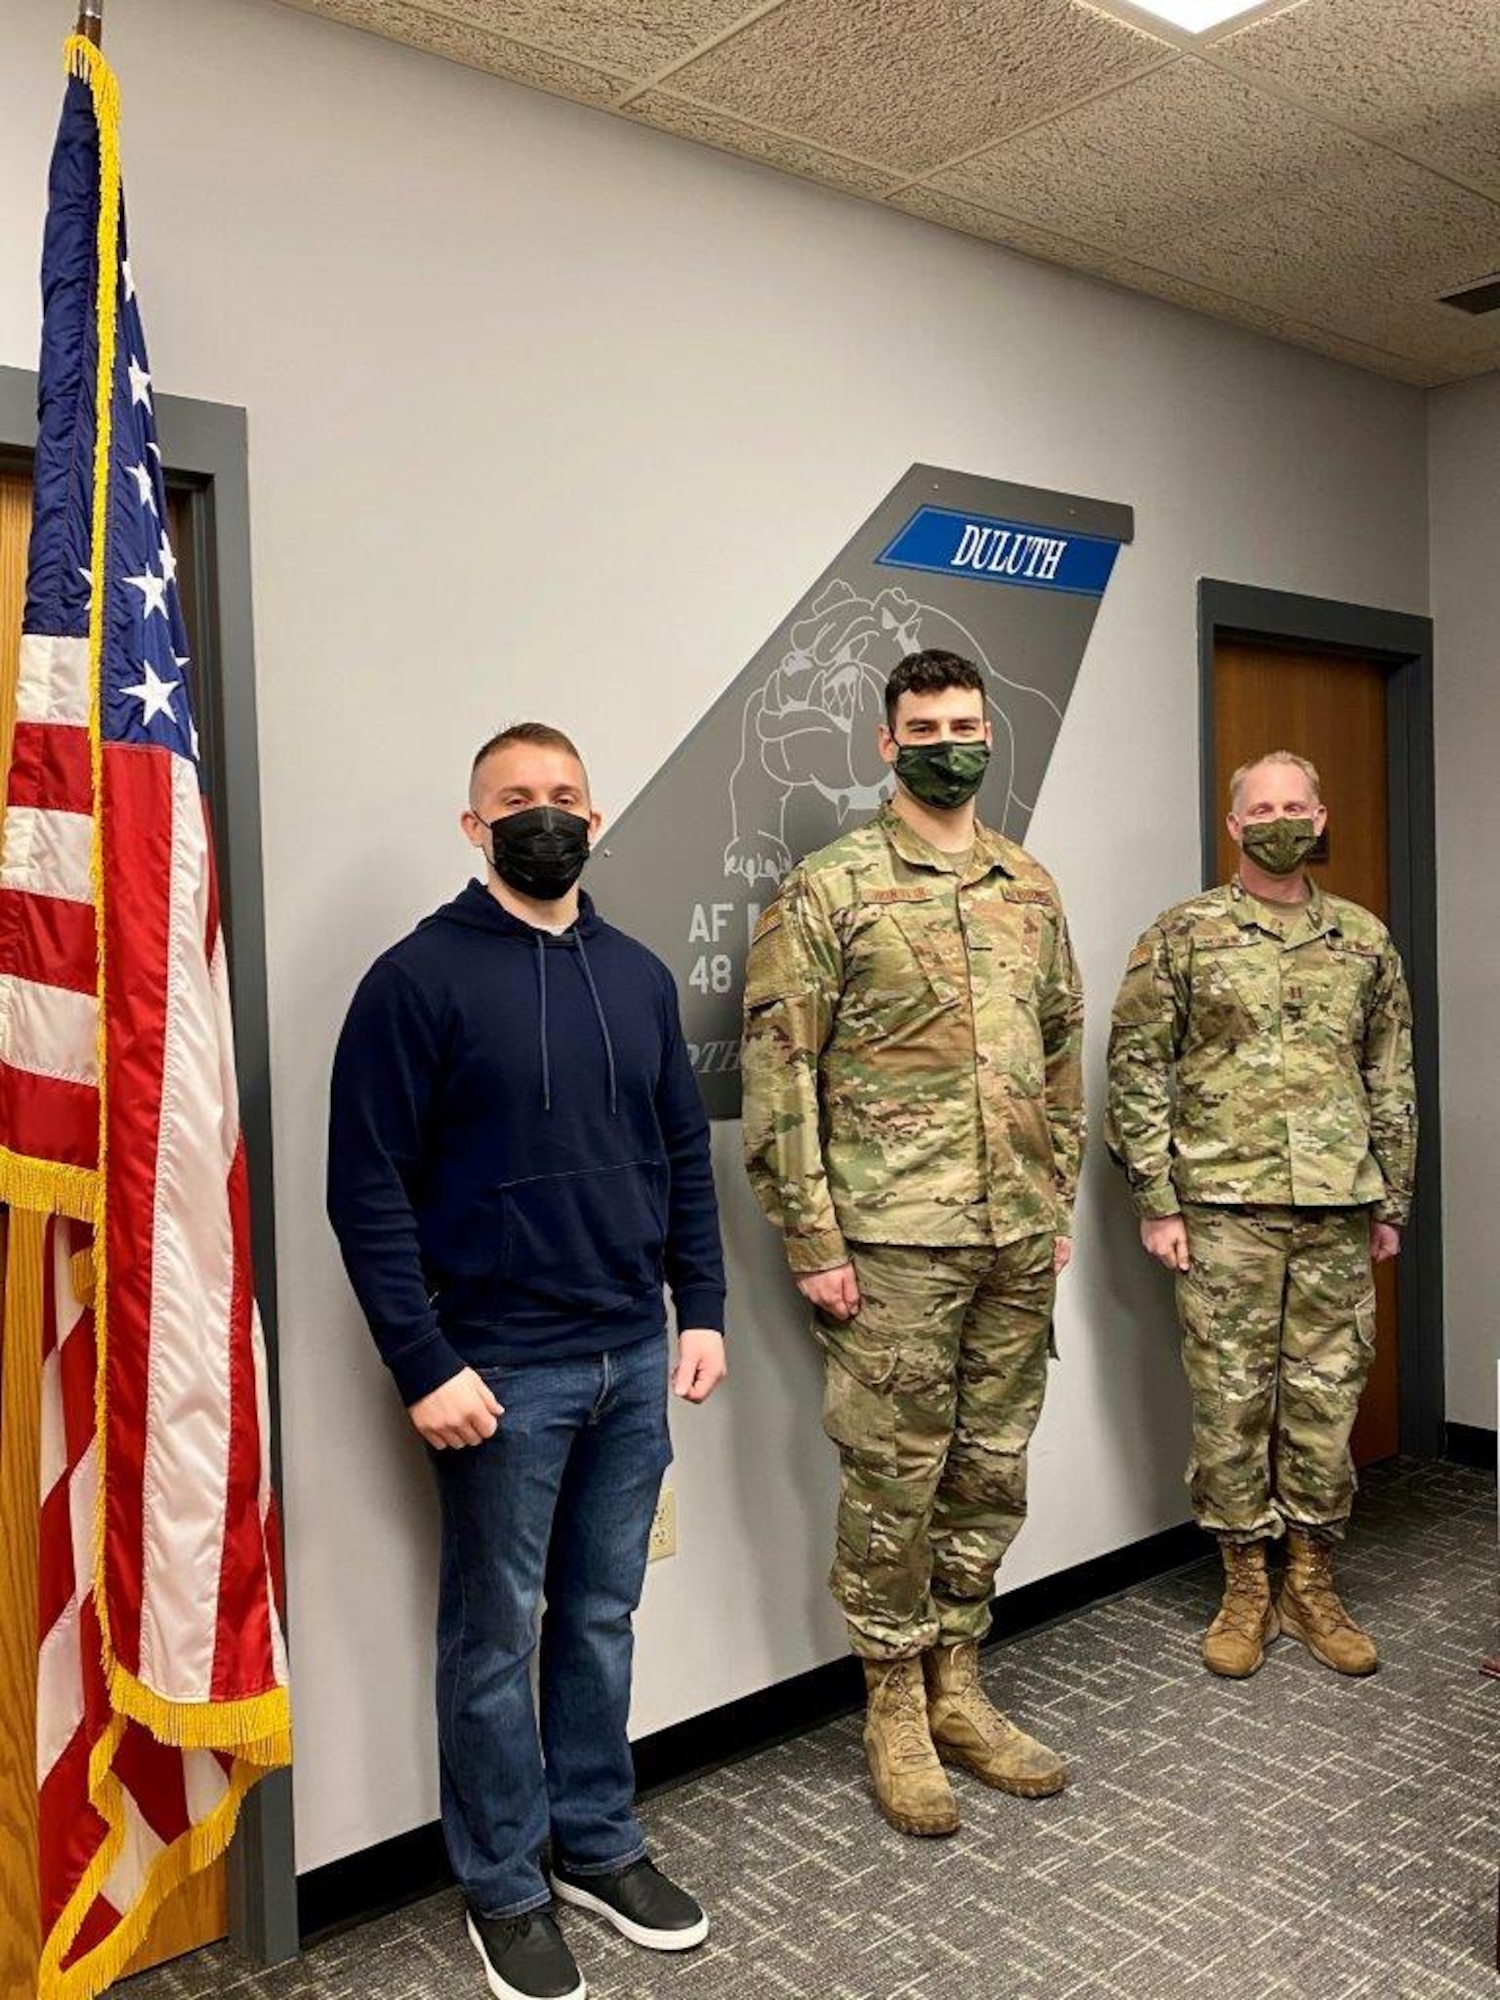 Andy Boso, Tech. Sgt. Jason Johnston and Capt. Josh Kolkind pose for a photo after Boso and Johnston took the Oath of Enlistment on Feb. 2, 2021. (U.S. Air National Guard photo by Audra Flanagan)